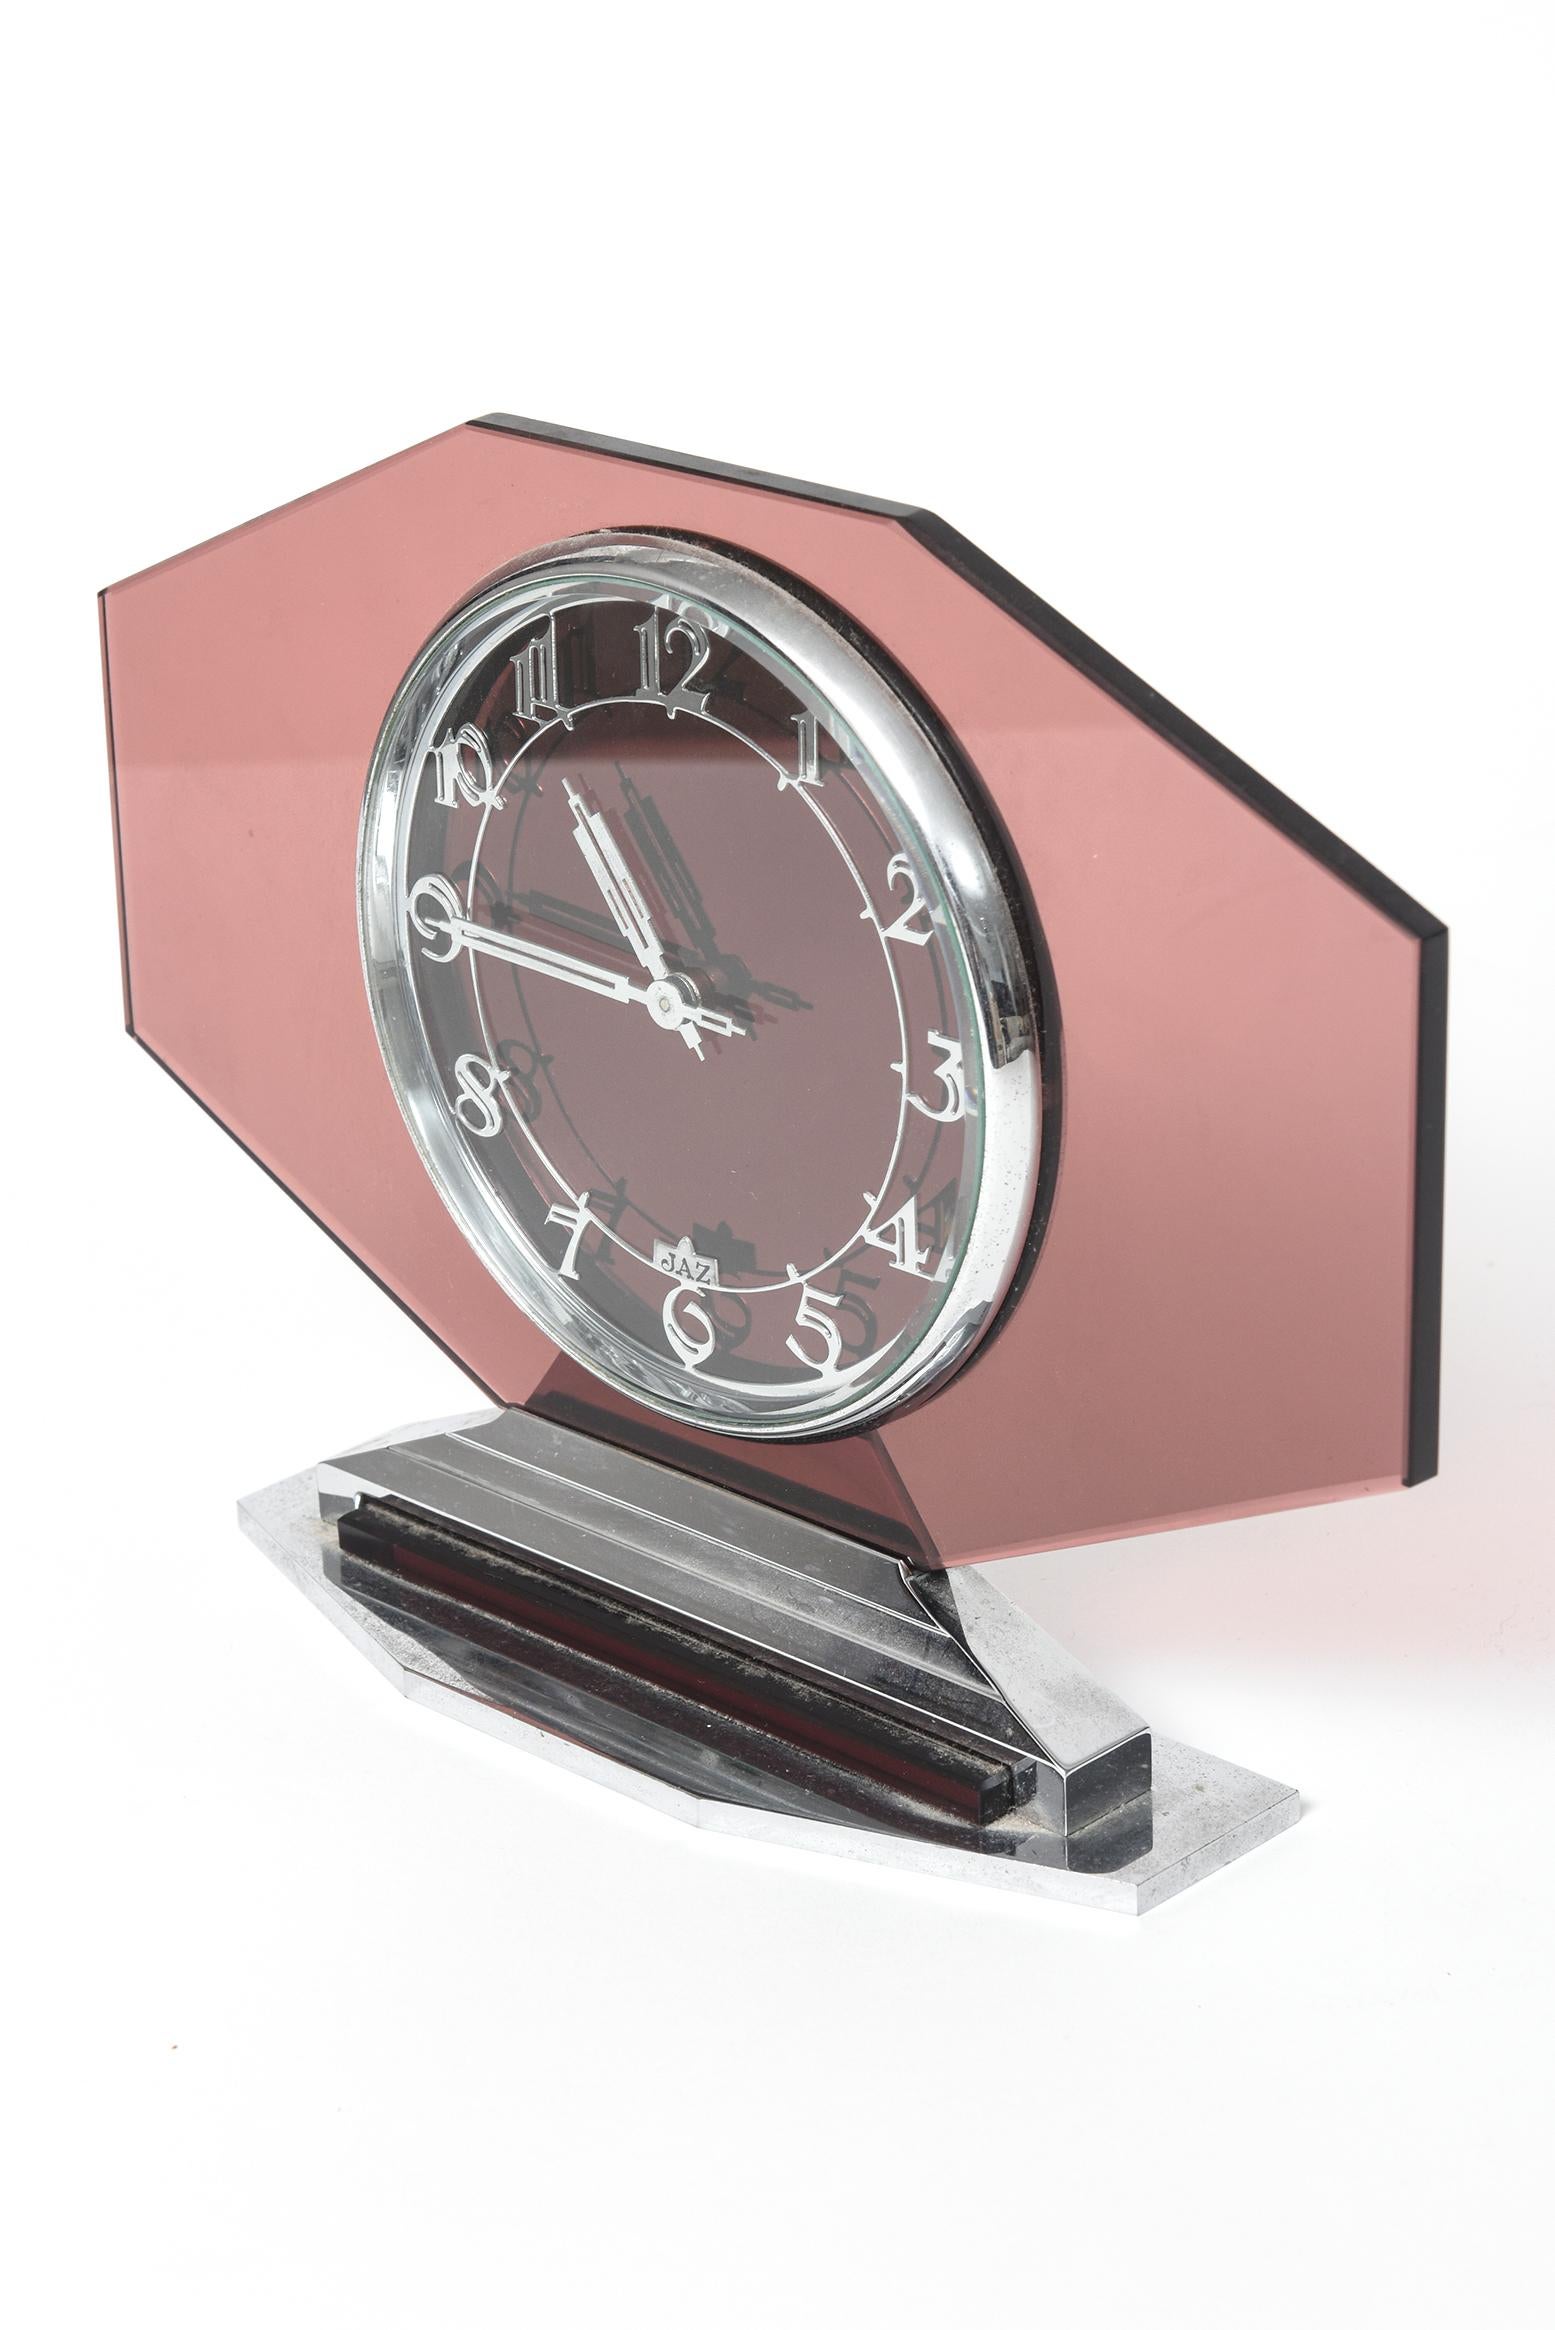 Art Deco French pink glass 'Jaz' 8-day clock. Pink glass with silver numerals and hands and metal base & top. Face has JAZ on it. Art Deco (c. 1910-1939). The clock is working.

Overall size is 7” high by 9 3/4” wide by 2”deep.